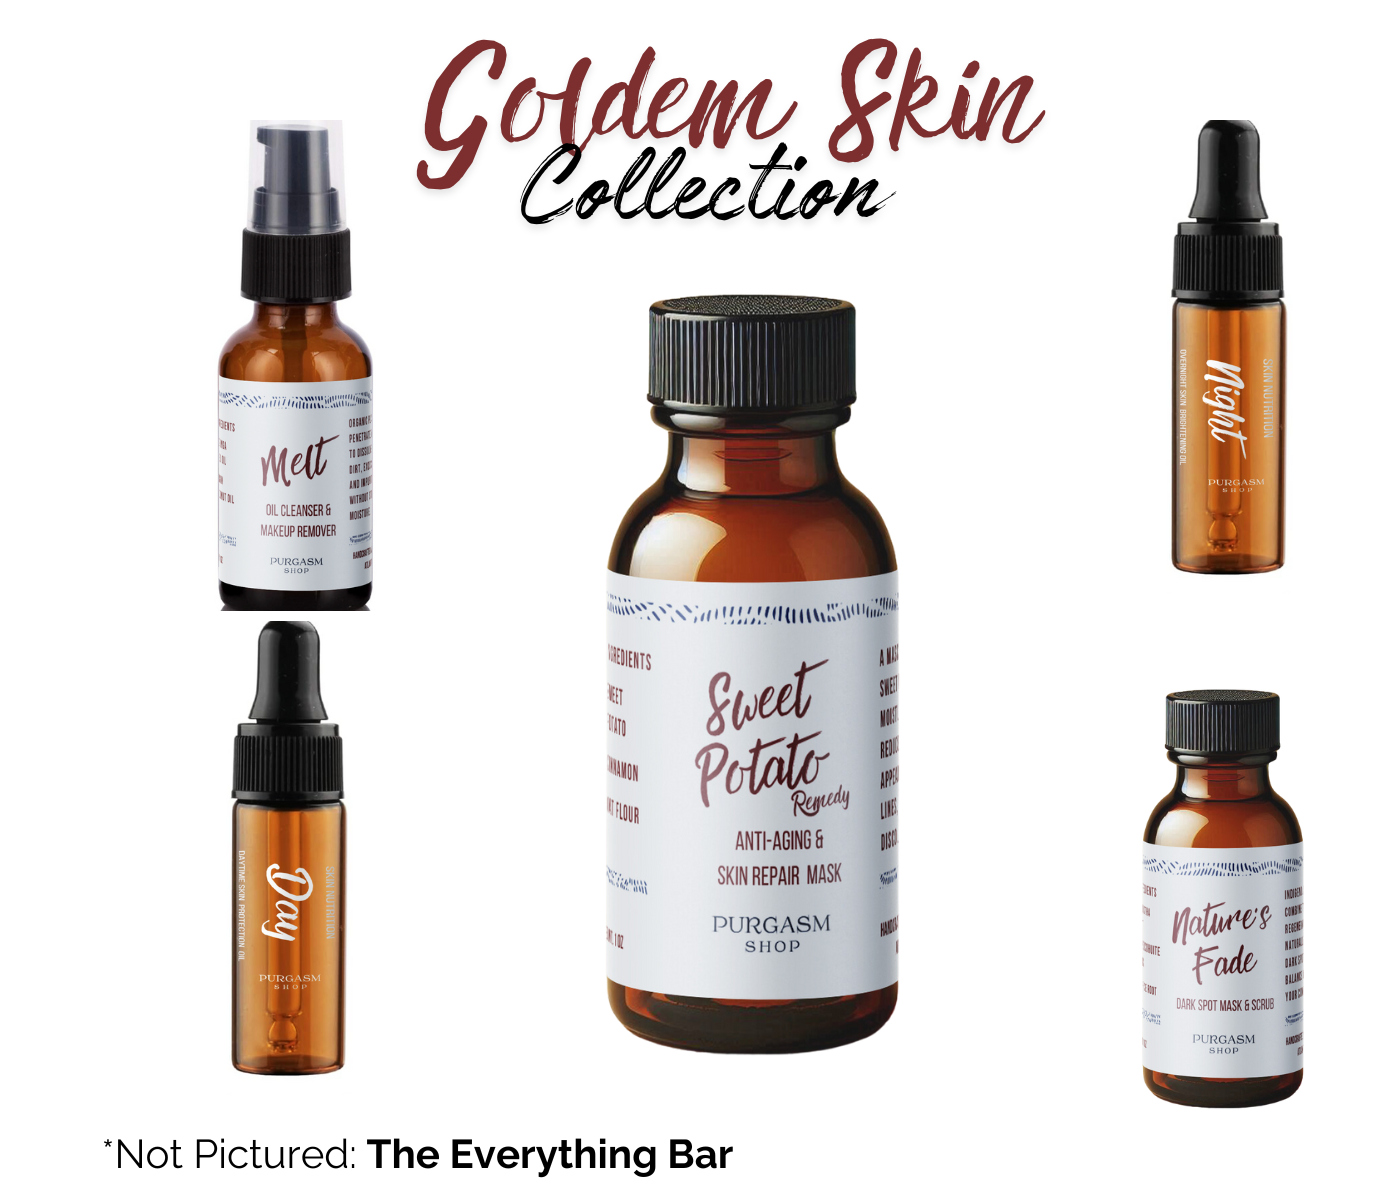 Golden Skin Collection